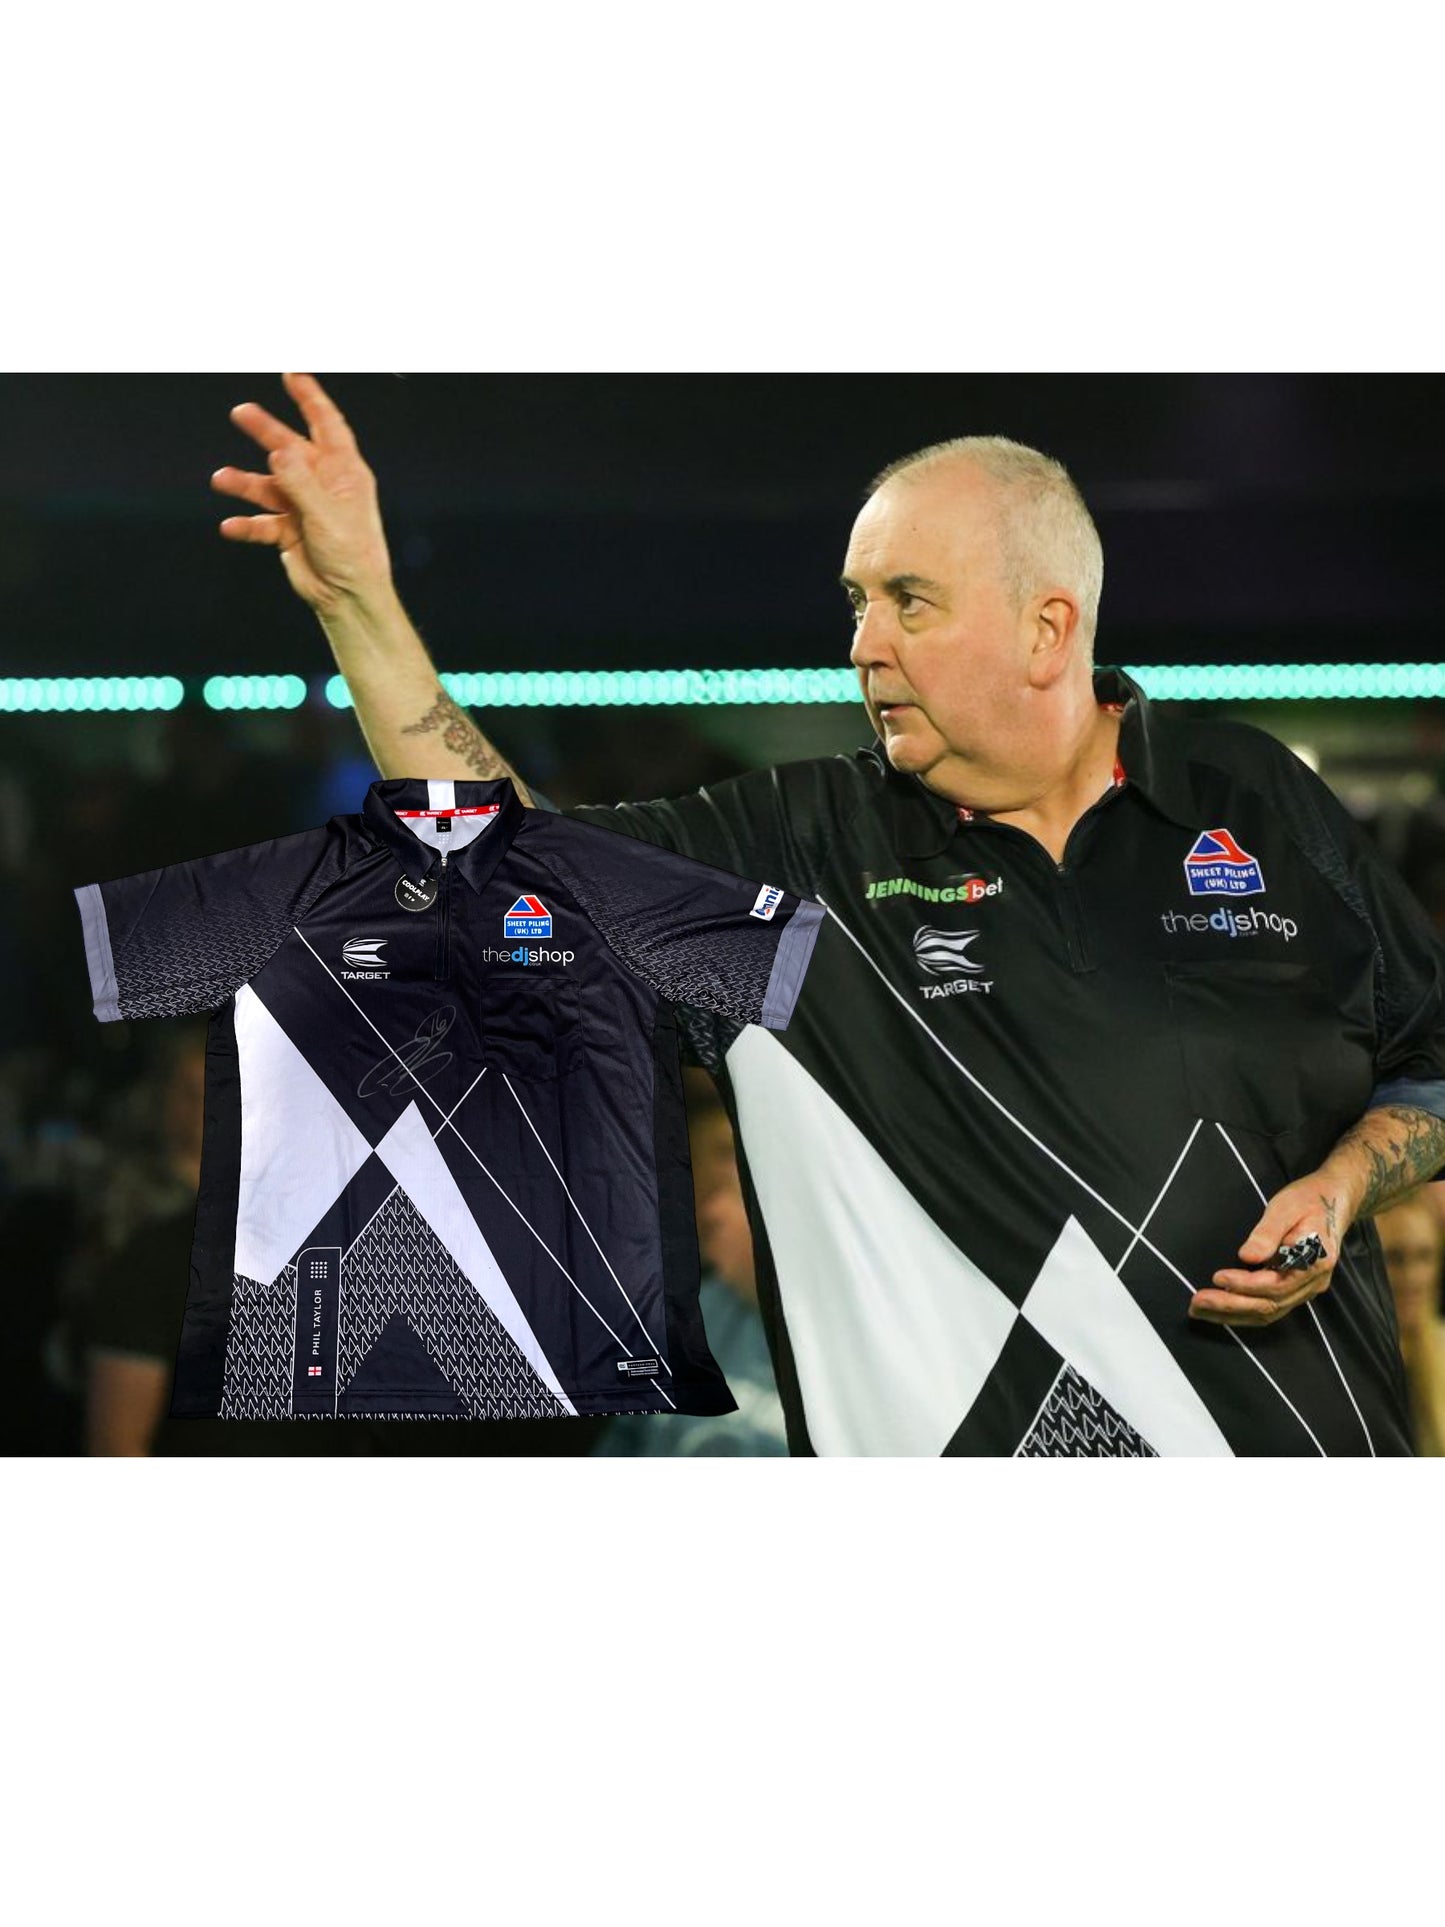 Phil ‘The Power’ Taylor Signed WSDT Target Coolplay Darts Shirt